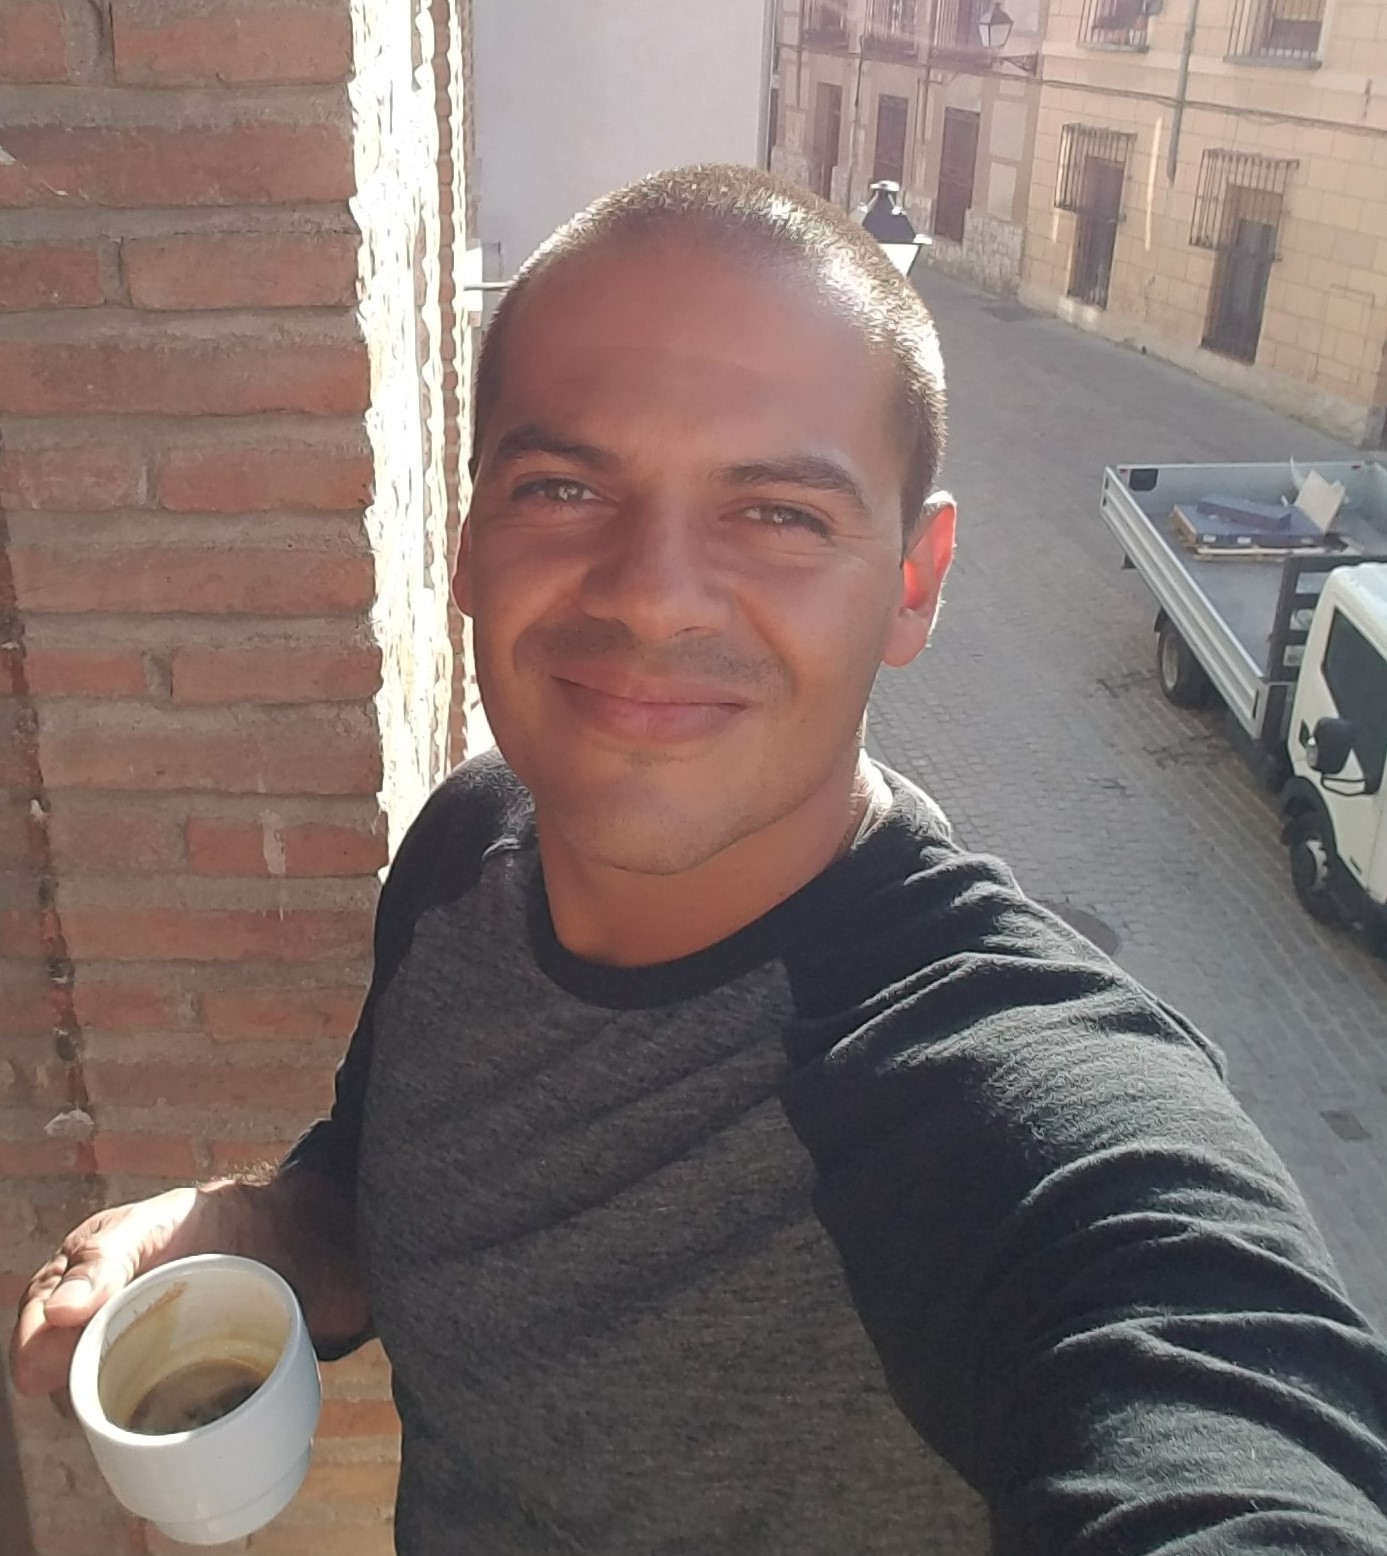 Photo of Carlos Solorzano, Staff Accountant at GBLS. Carlos is smiling at the camera and holding a cup of coffee.